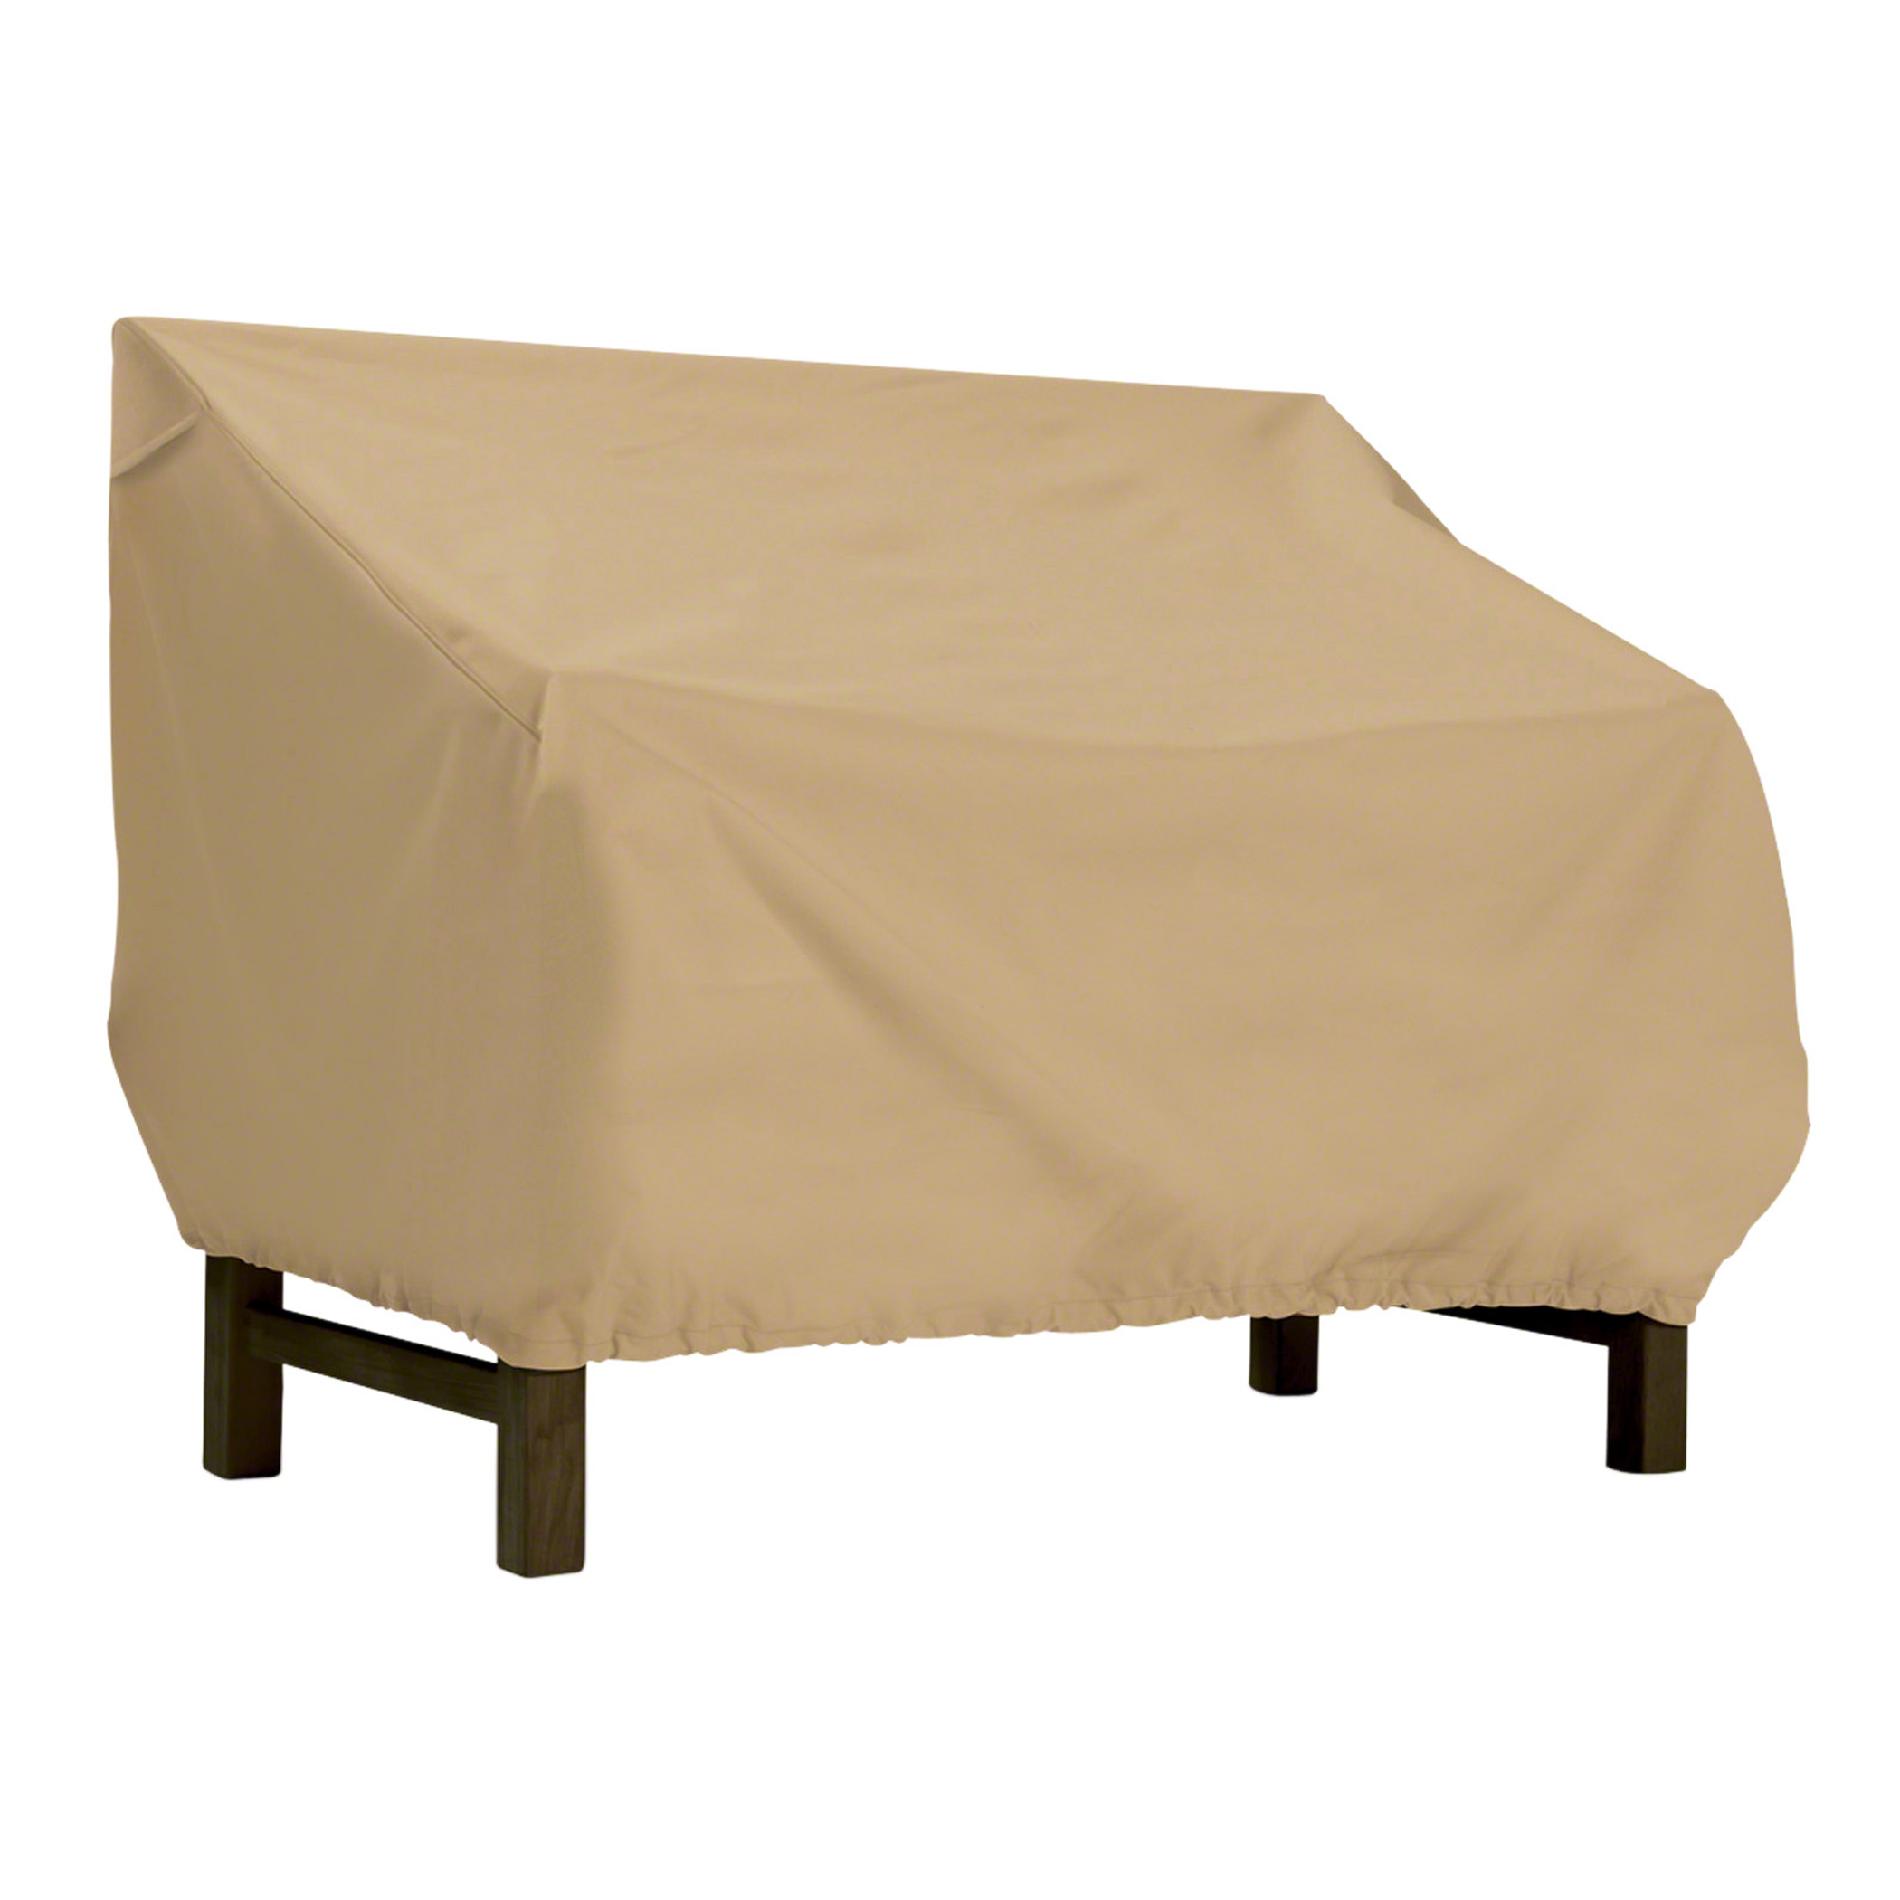 UPC 052963009798 product image for Terrazzo Large Bench / Loveseat Cover | upcitemdb.com